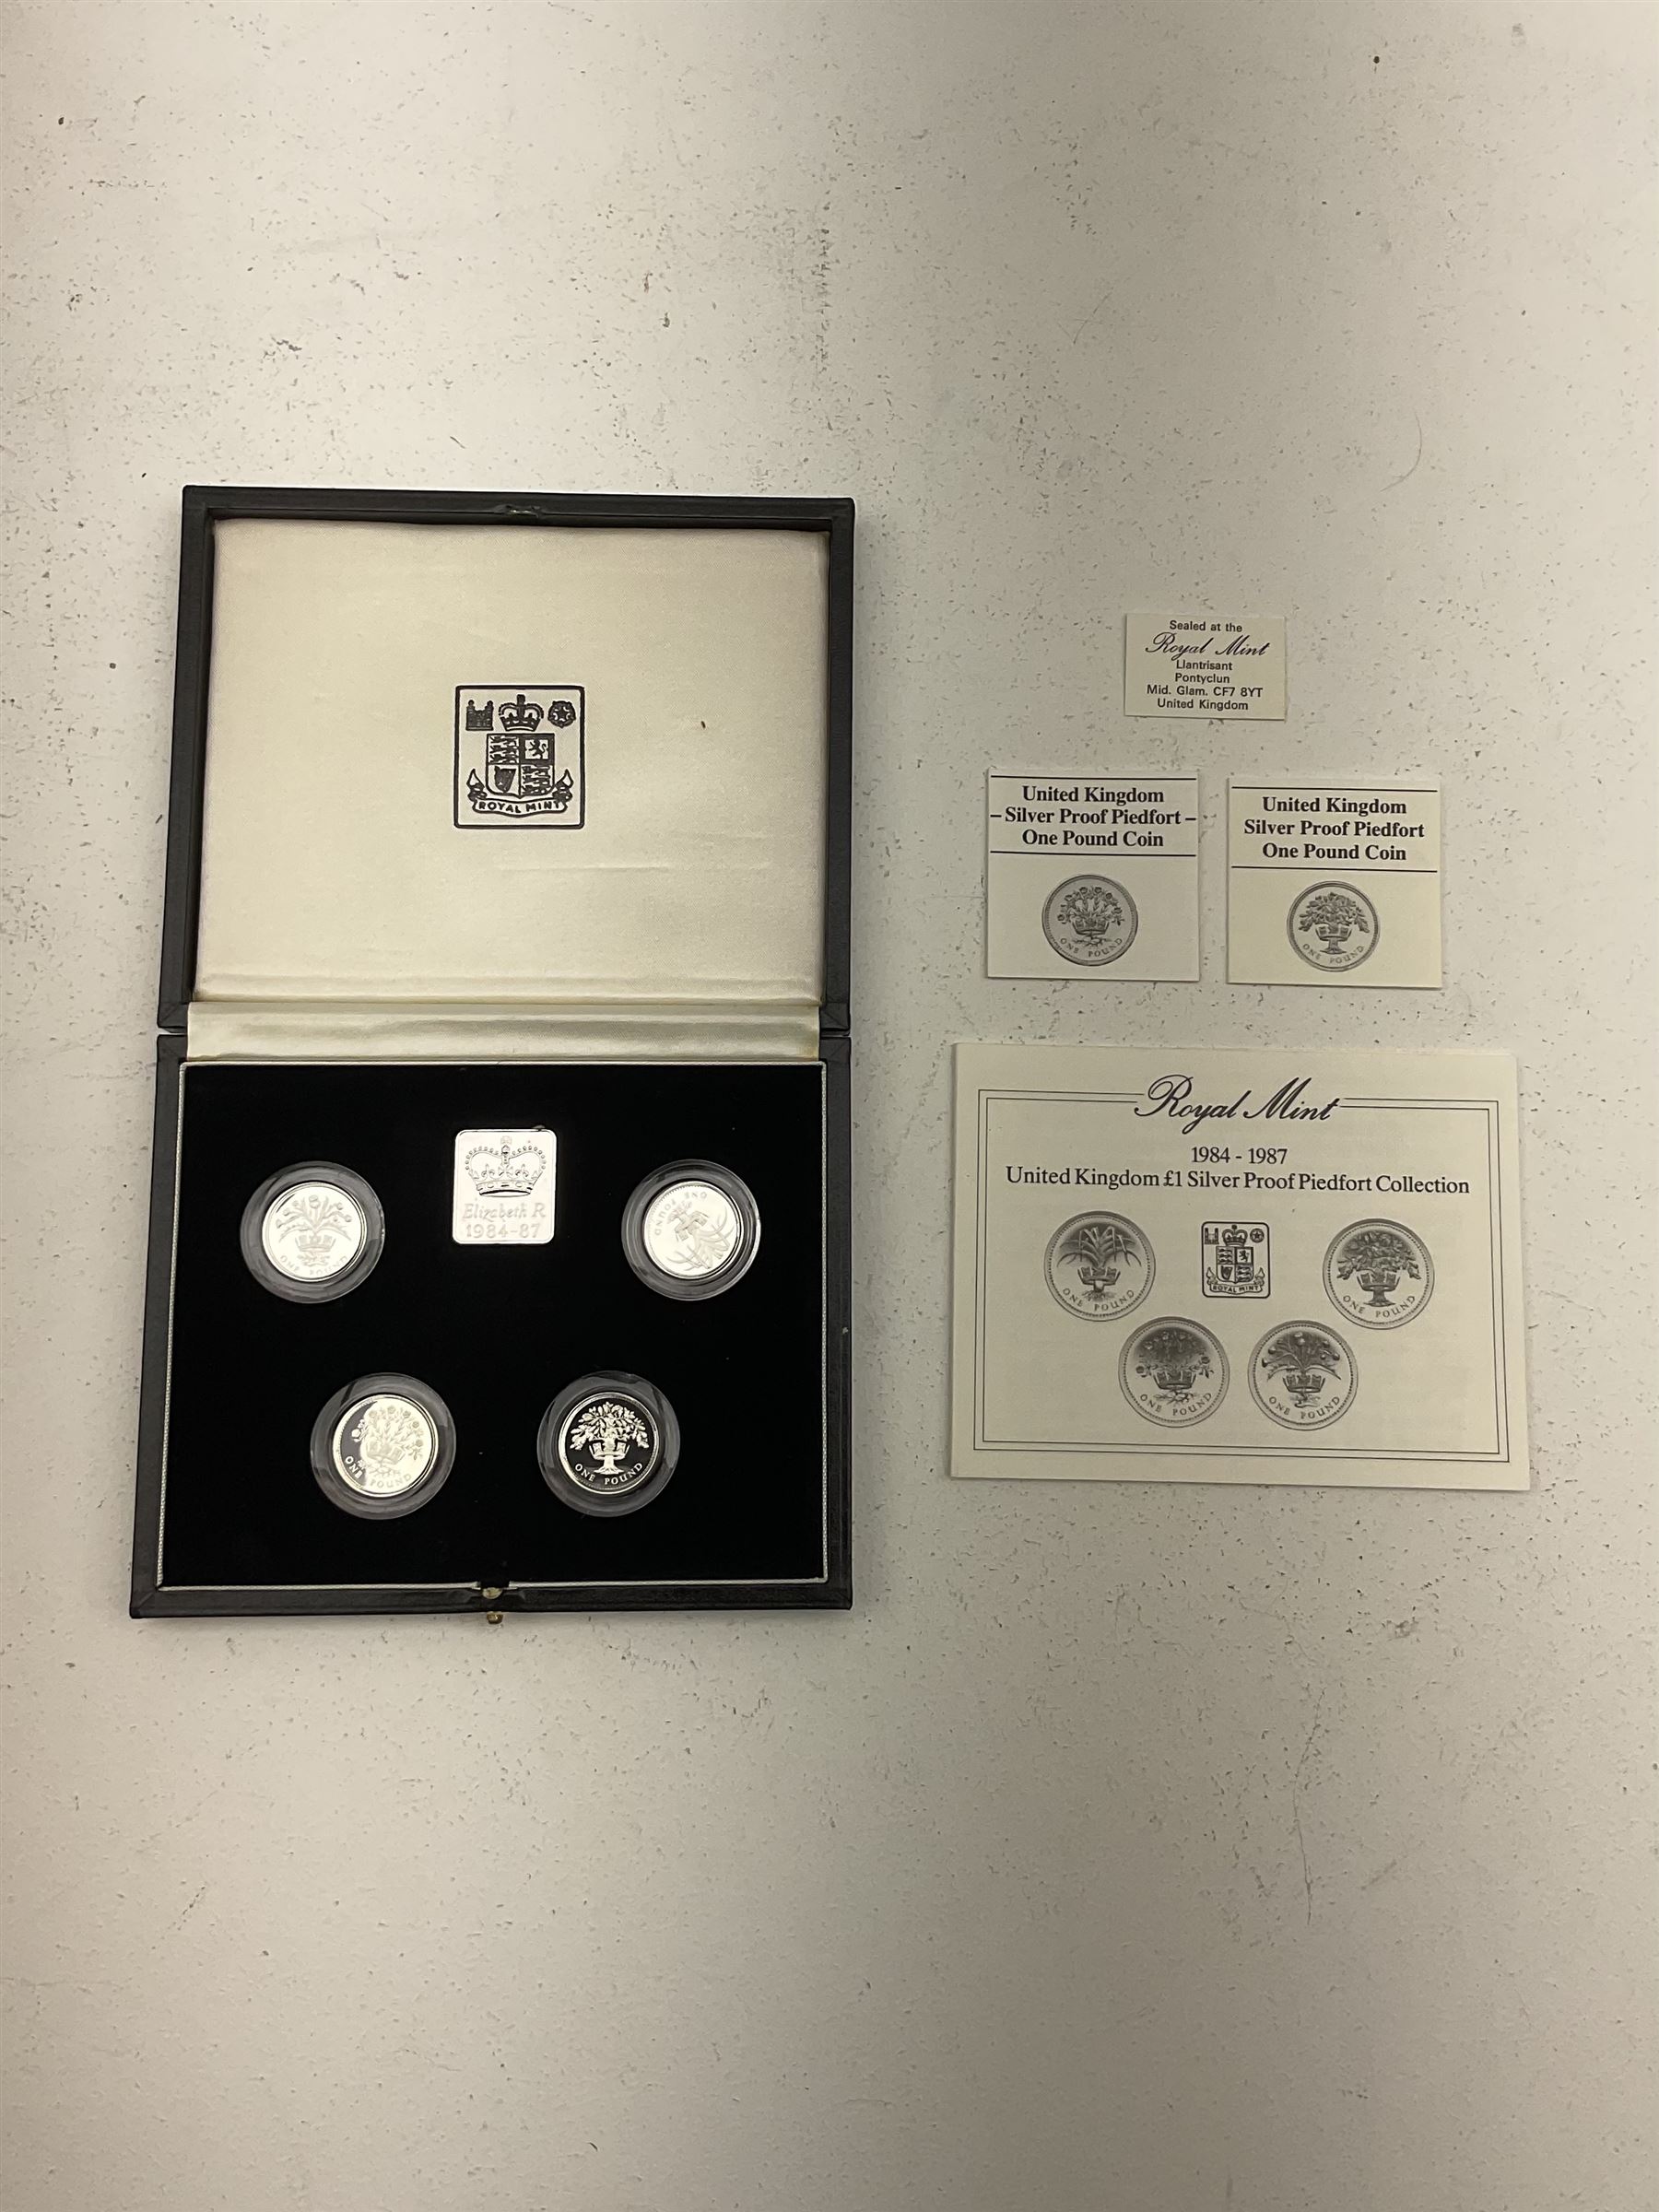 The Royal Mint United Kingdom 1984 to 1987 silver proof one pound coin collection and 1984 to 1987 s - Image 2 of 4